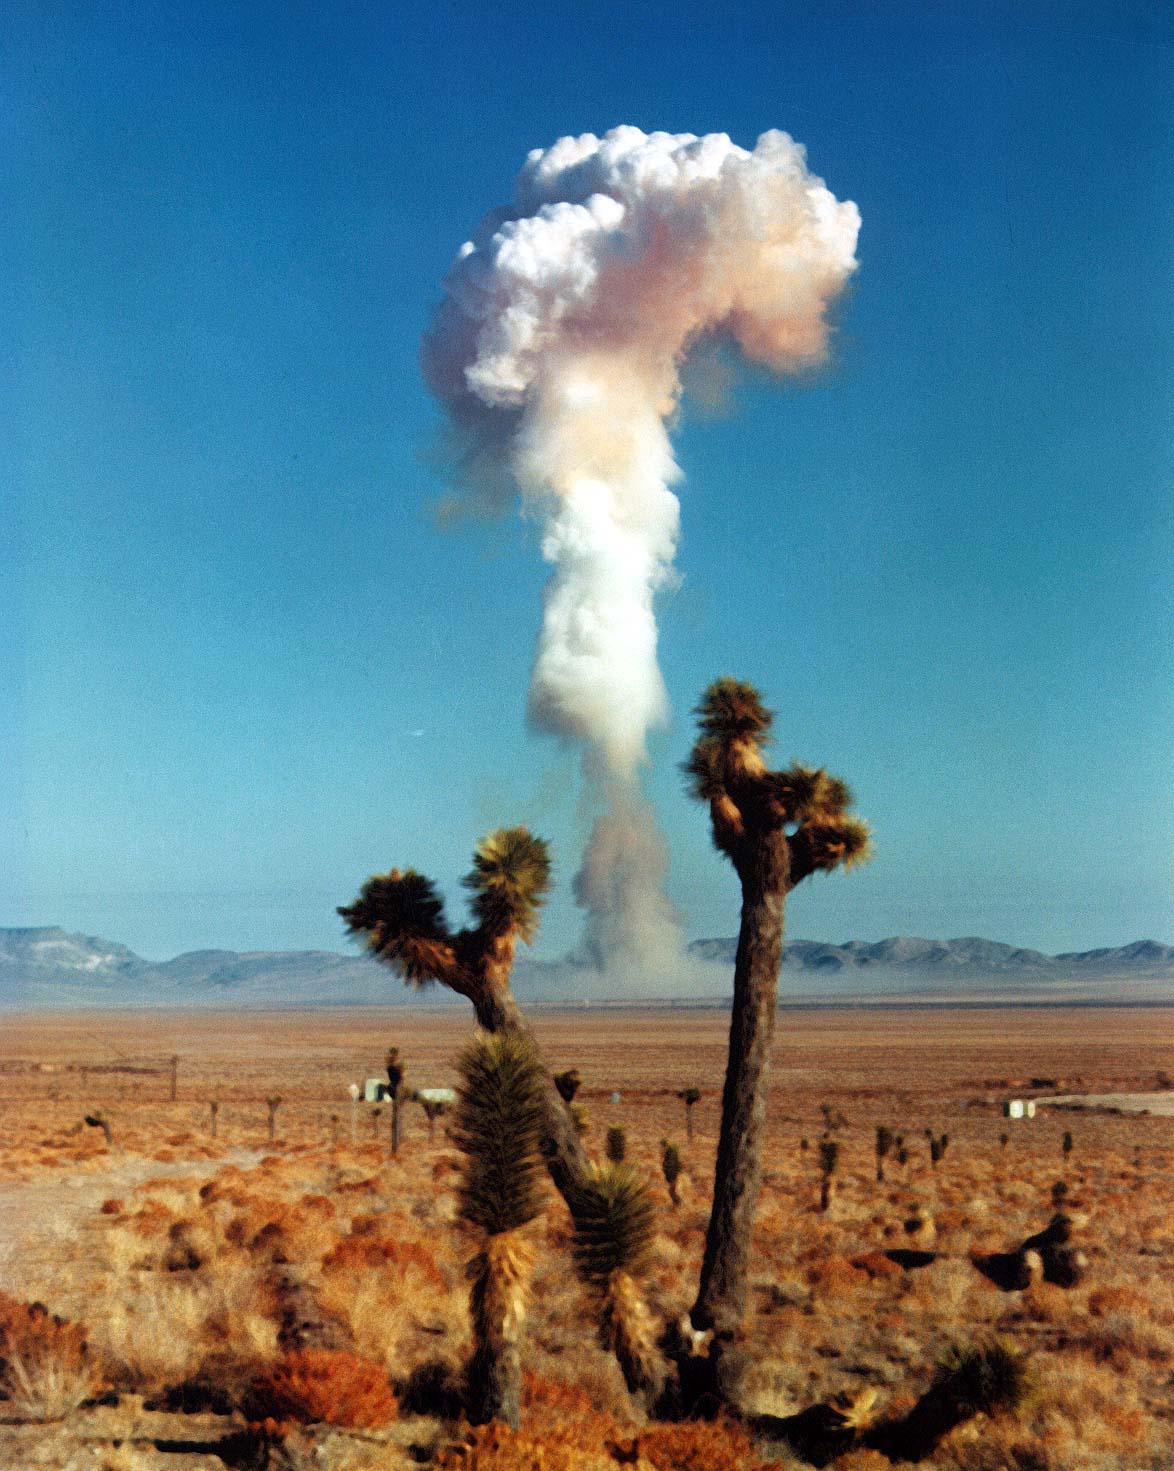 DeBACA
DeBACA was a balloon burst fired October 26, 1958. Since July 1962, all NTS weapons tests have been underground.

De Baca was part of the Hardtack II Operation. Number 186 at 2.2kt. 
Keywords: Nevada Test Site, Mercury, Nye County, Nevada NTS